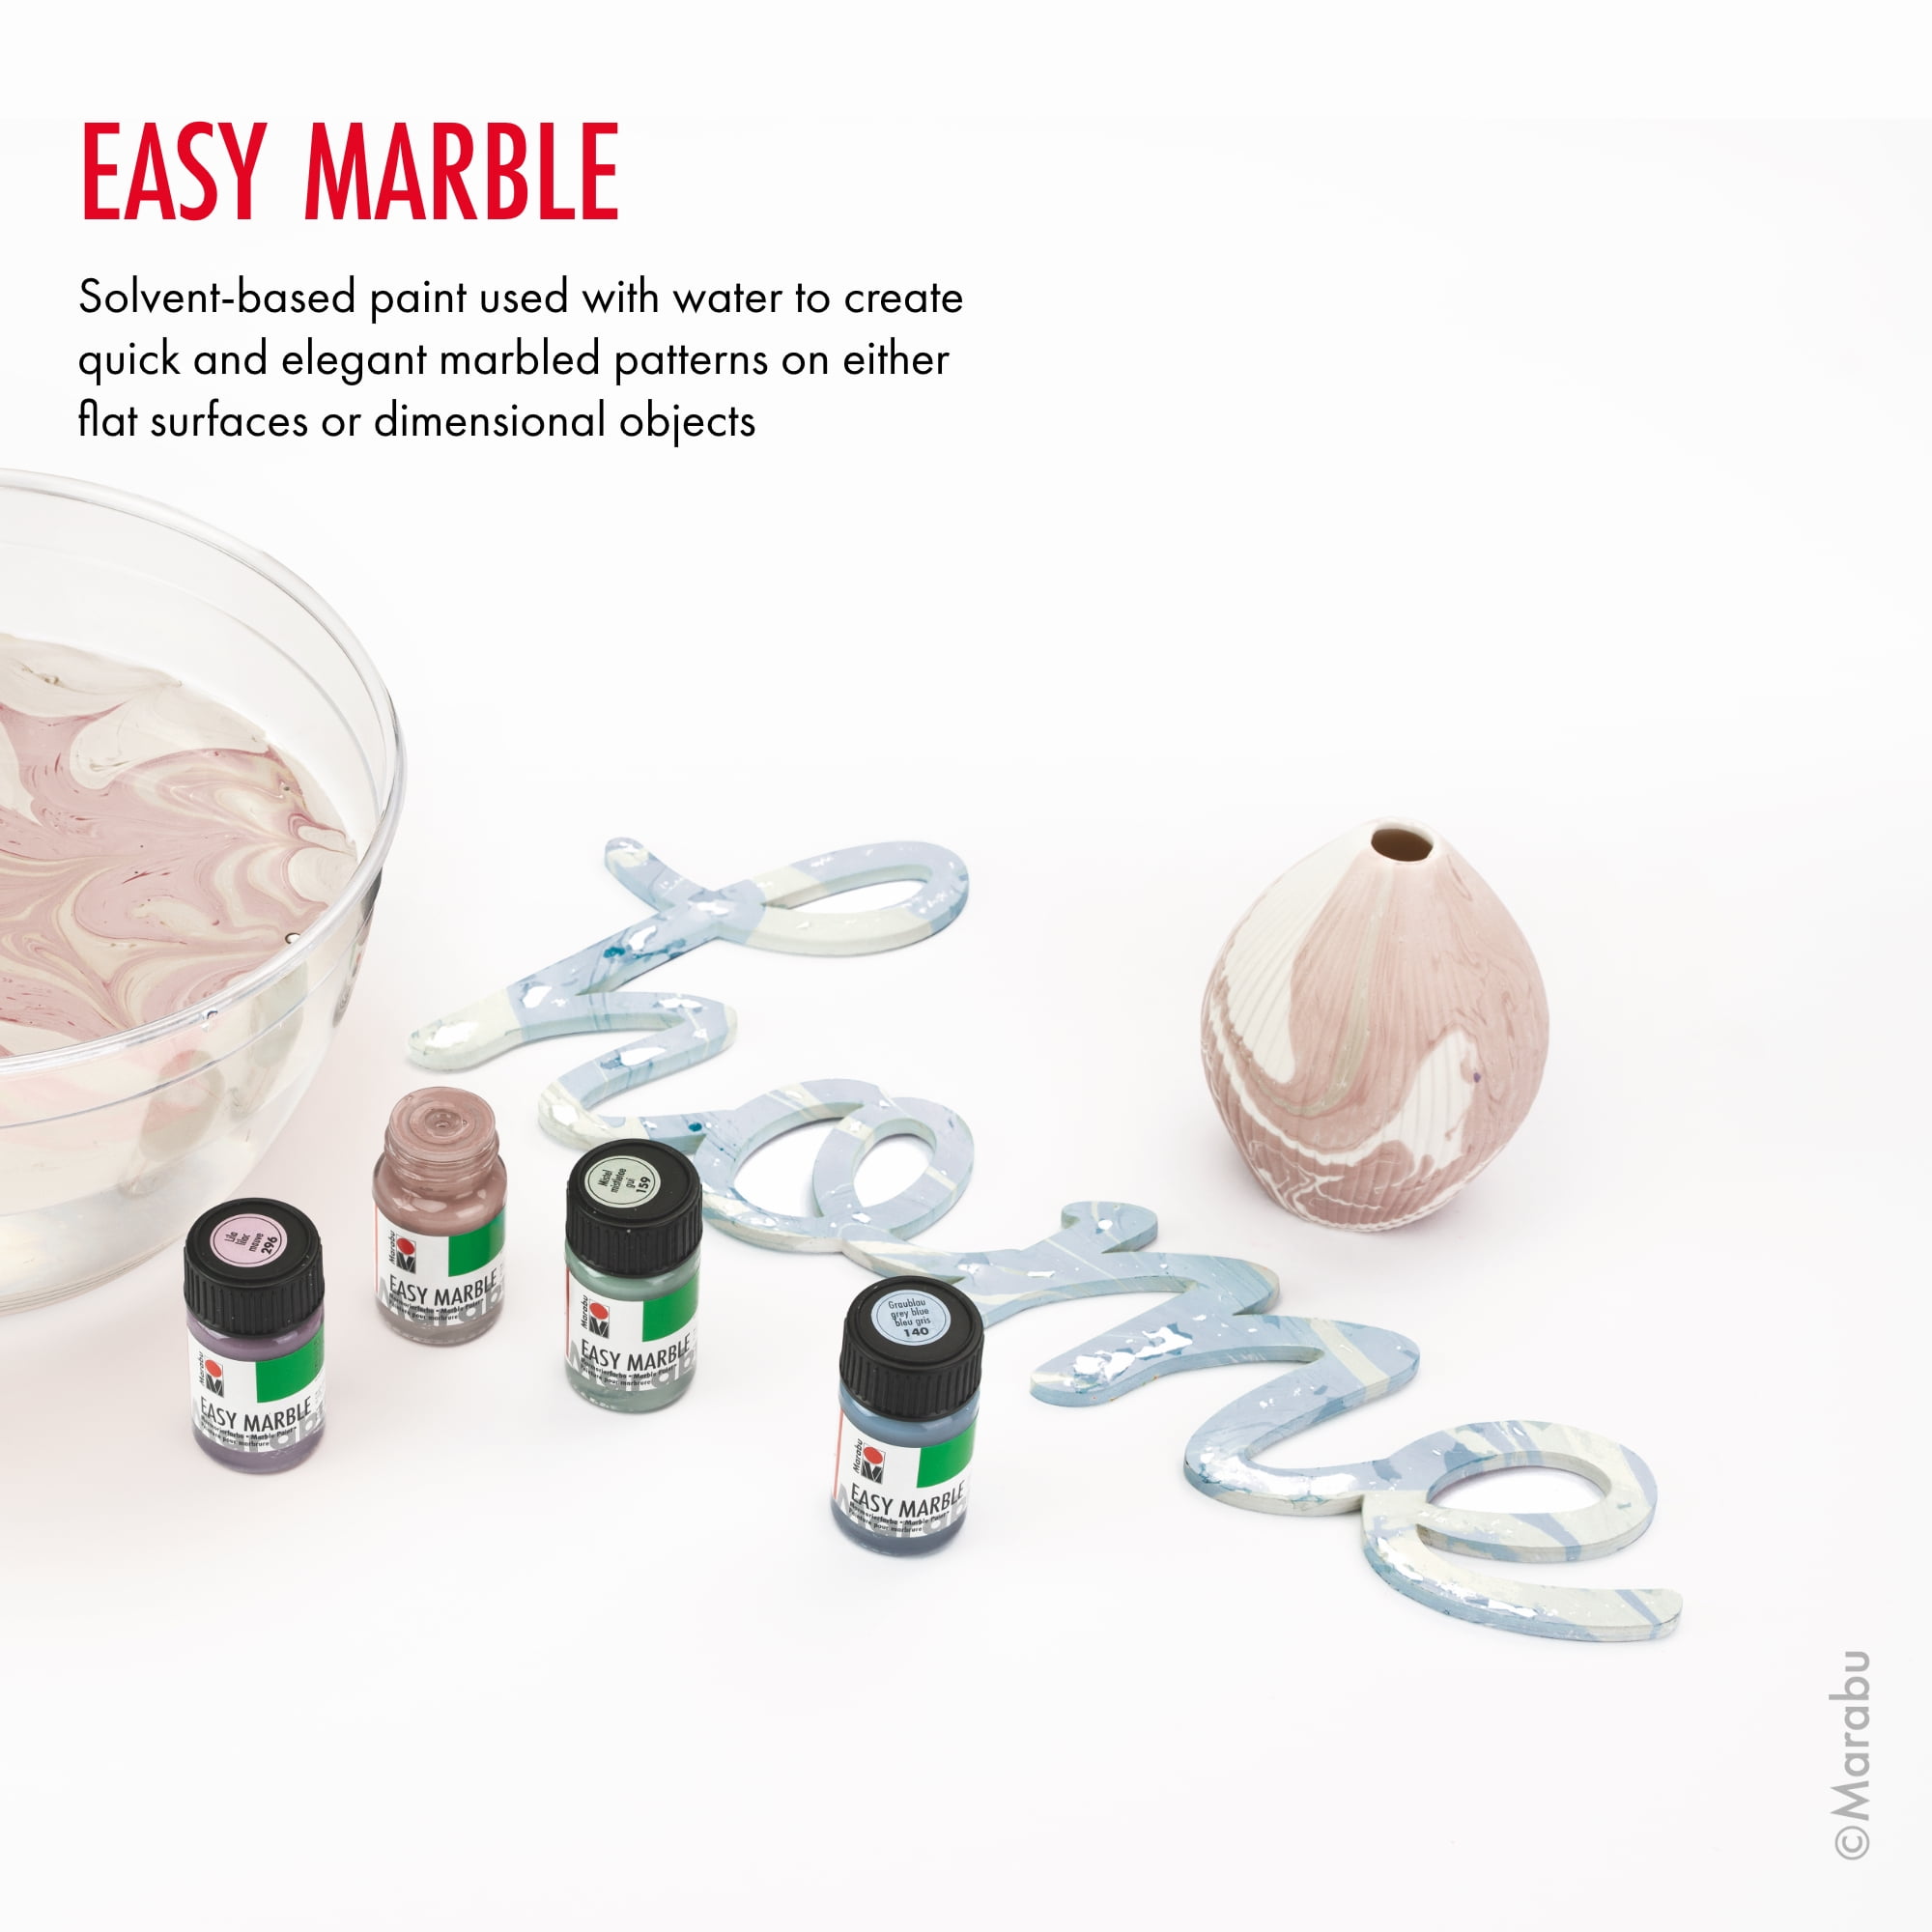 Marabu Easy Paint Marbling Paint Kit for Hydro Dipping 42 Colors • Price »